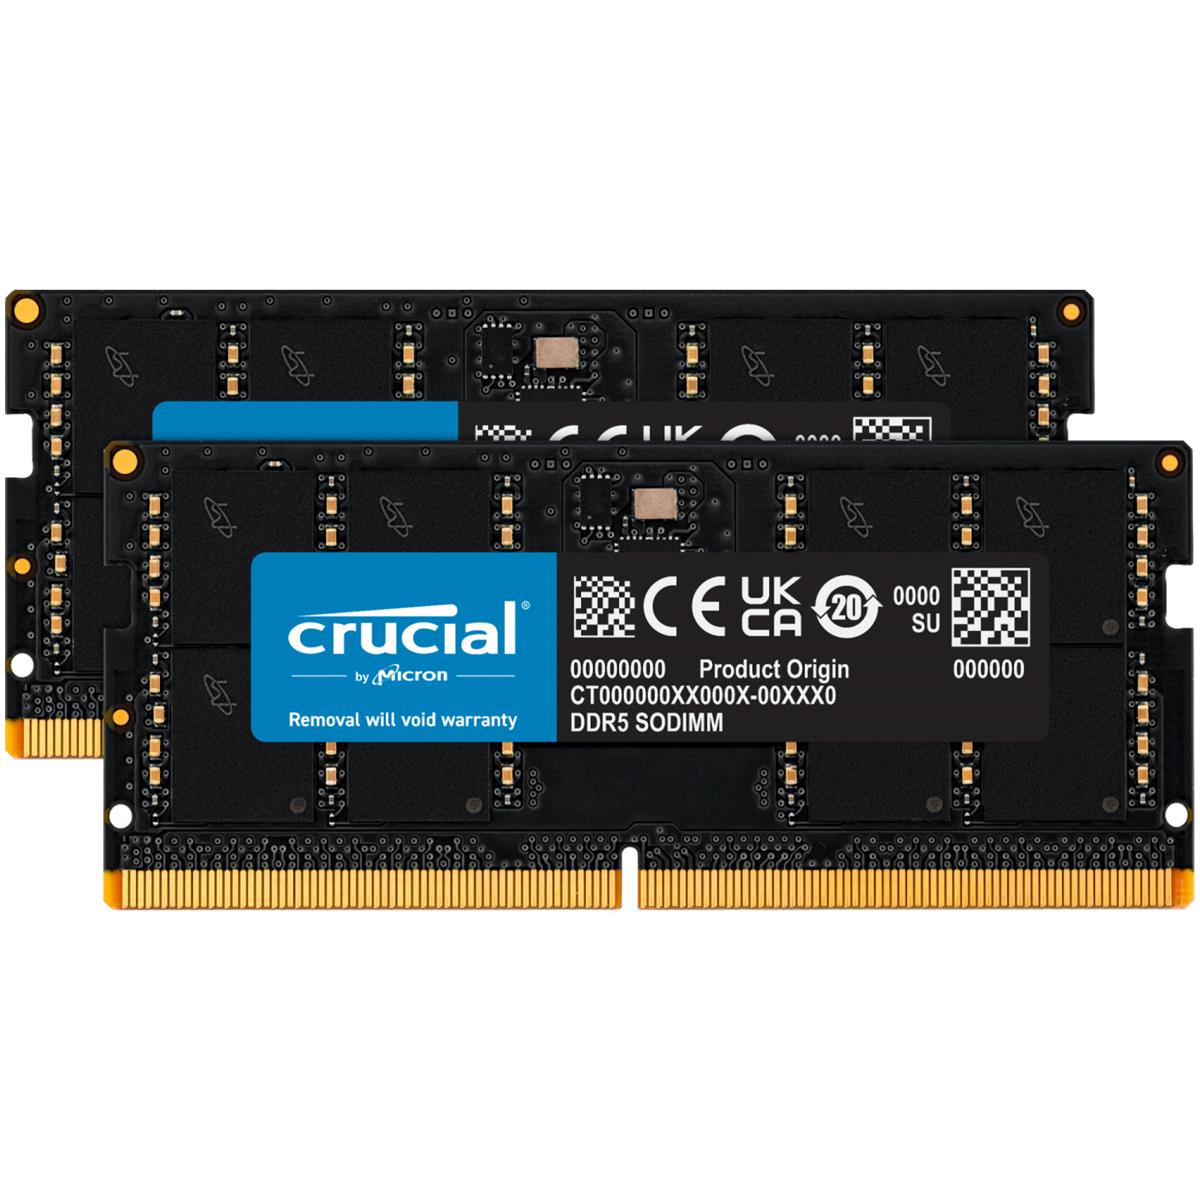 Image of Crucial 64GB (2x32GB) DDR5 4800MT/s CL40 SODIMM Memory Module Kit